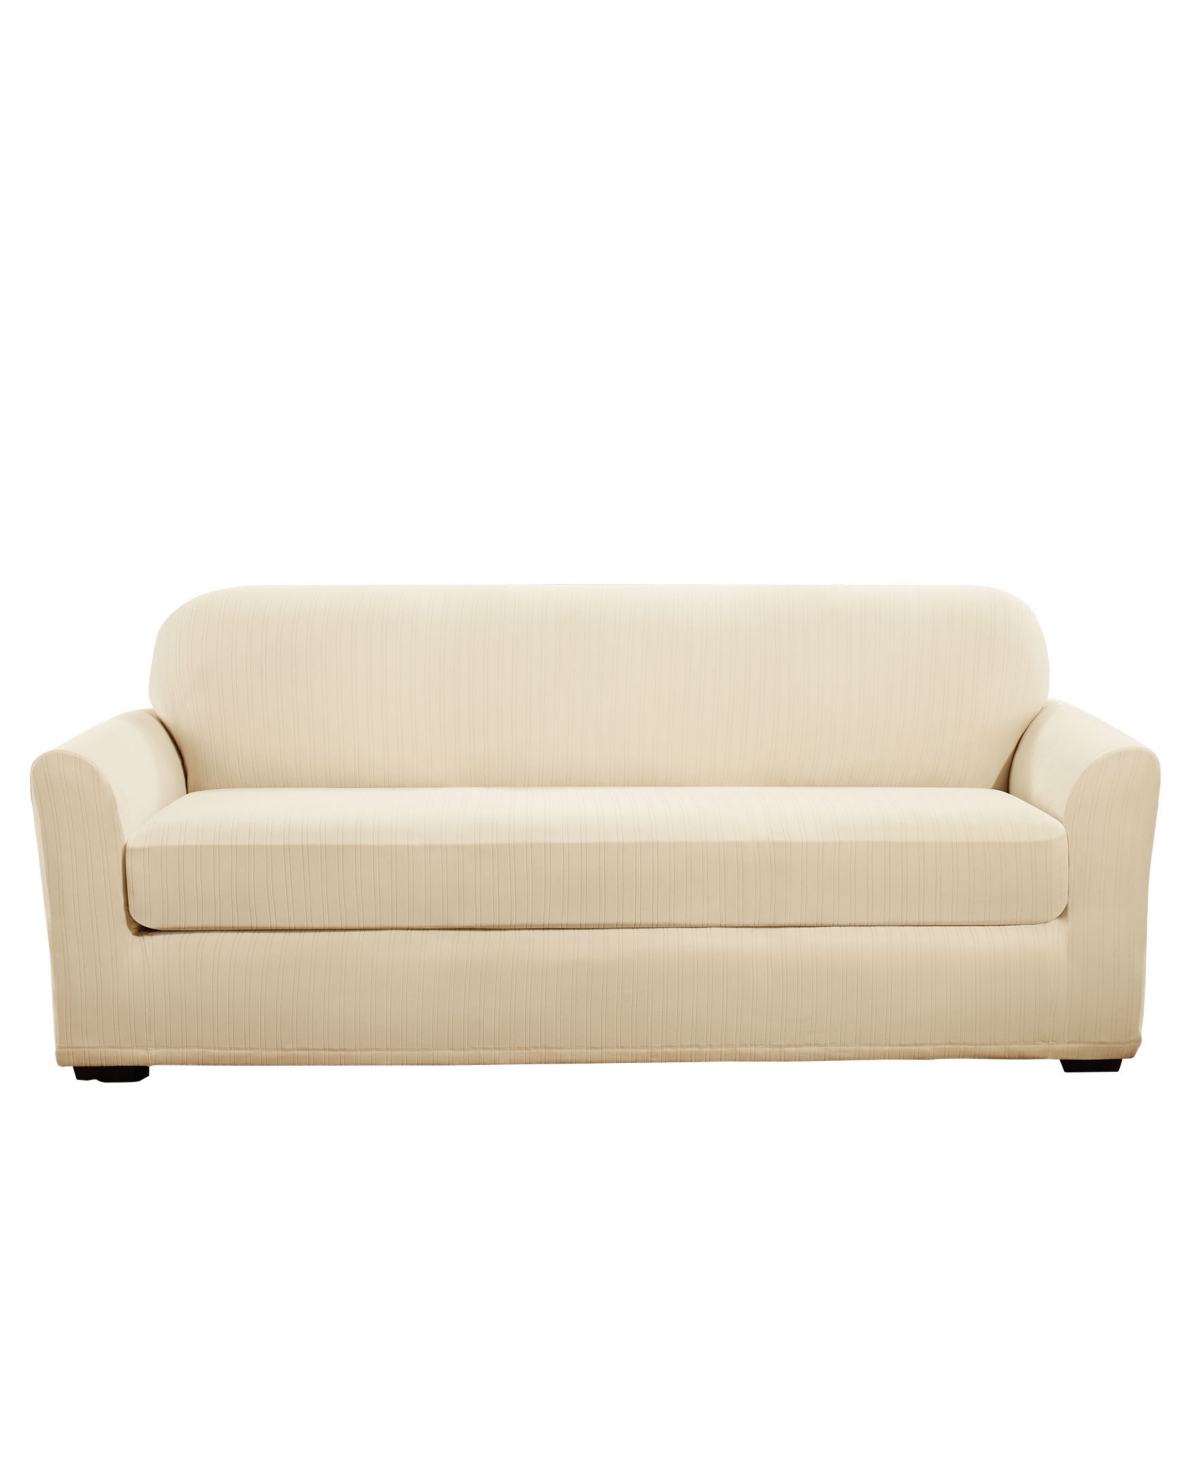 Sure Fit Stretch Pinstripe Two Piece Sofa Slipcover